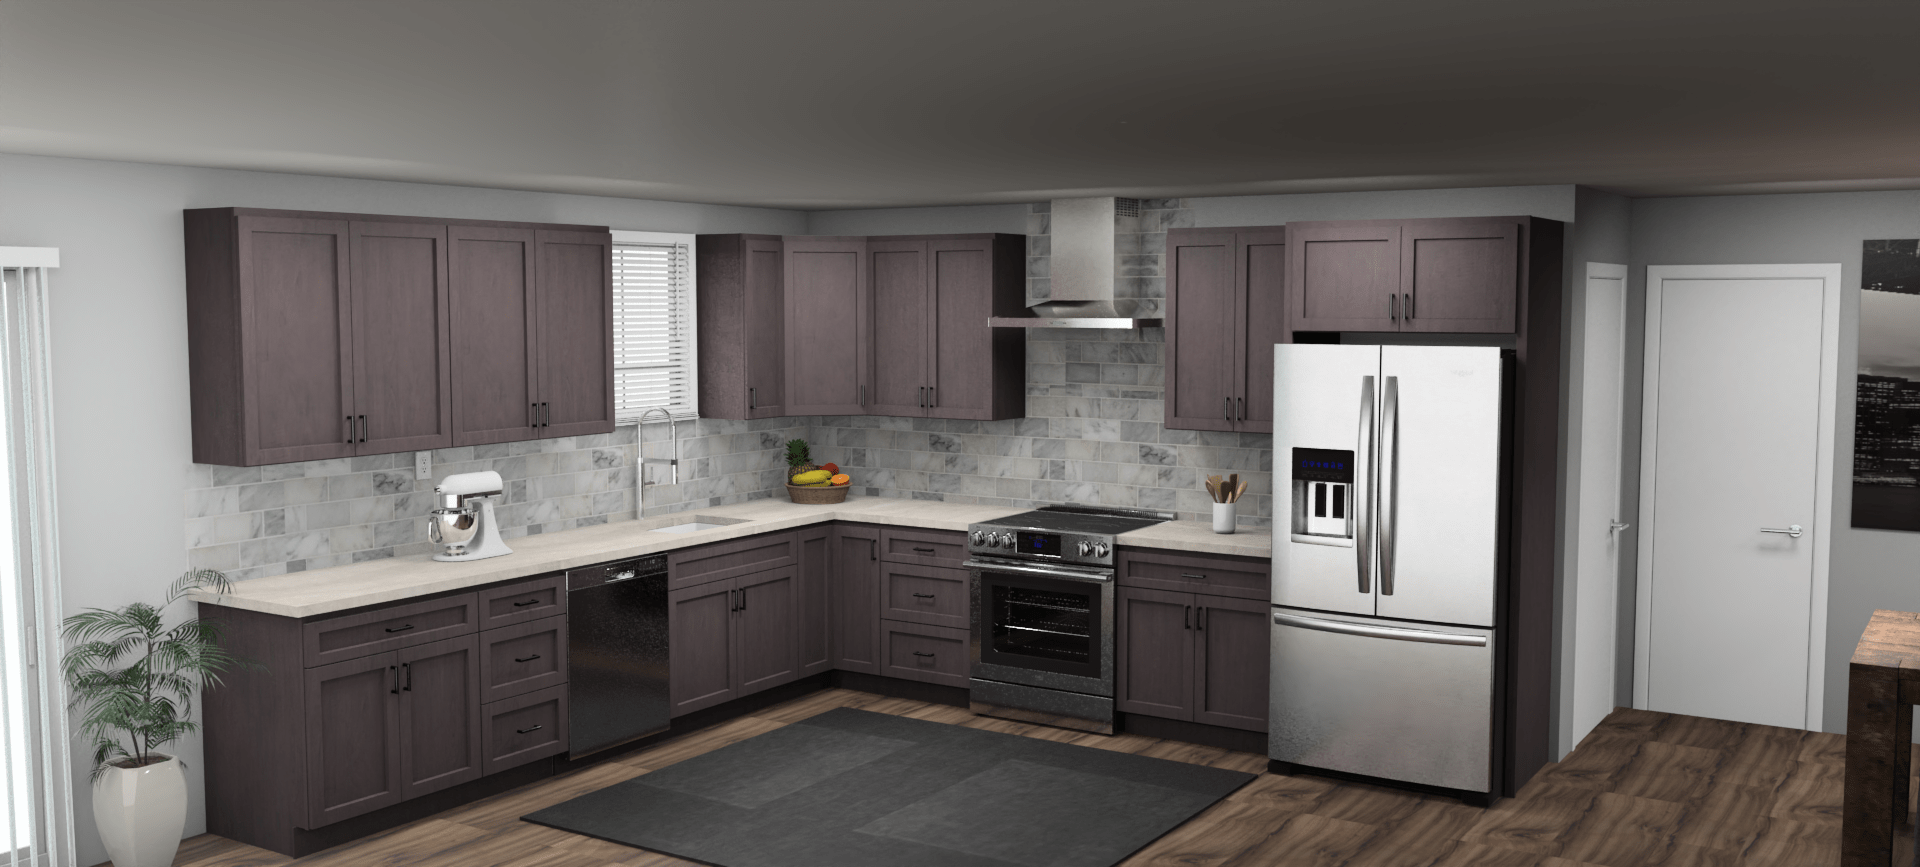 Pioneer The Cinder Grey 12 x 13 L Shaped Kitchen Main Layout Photo